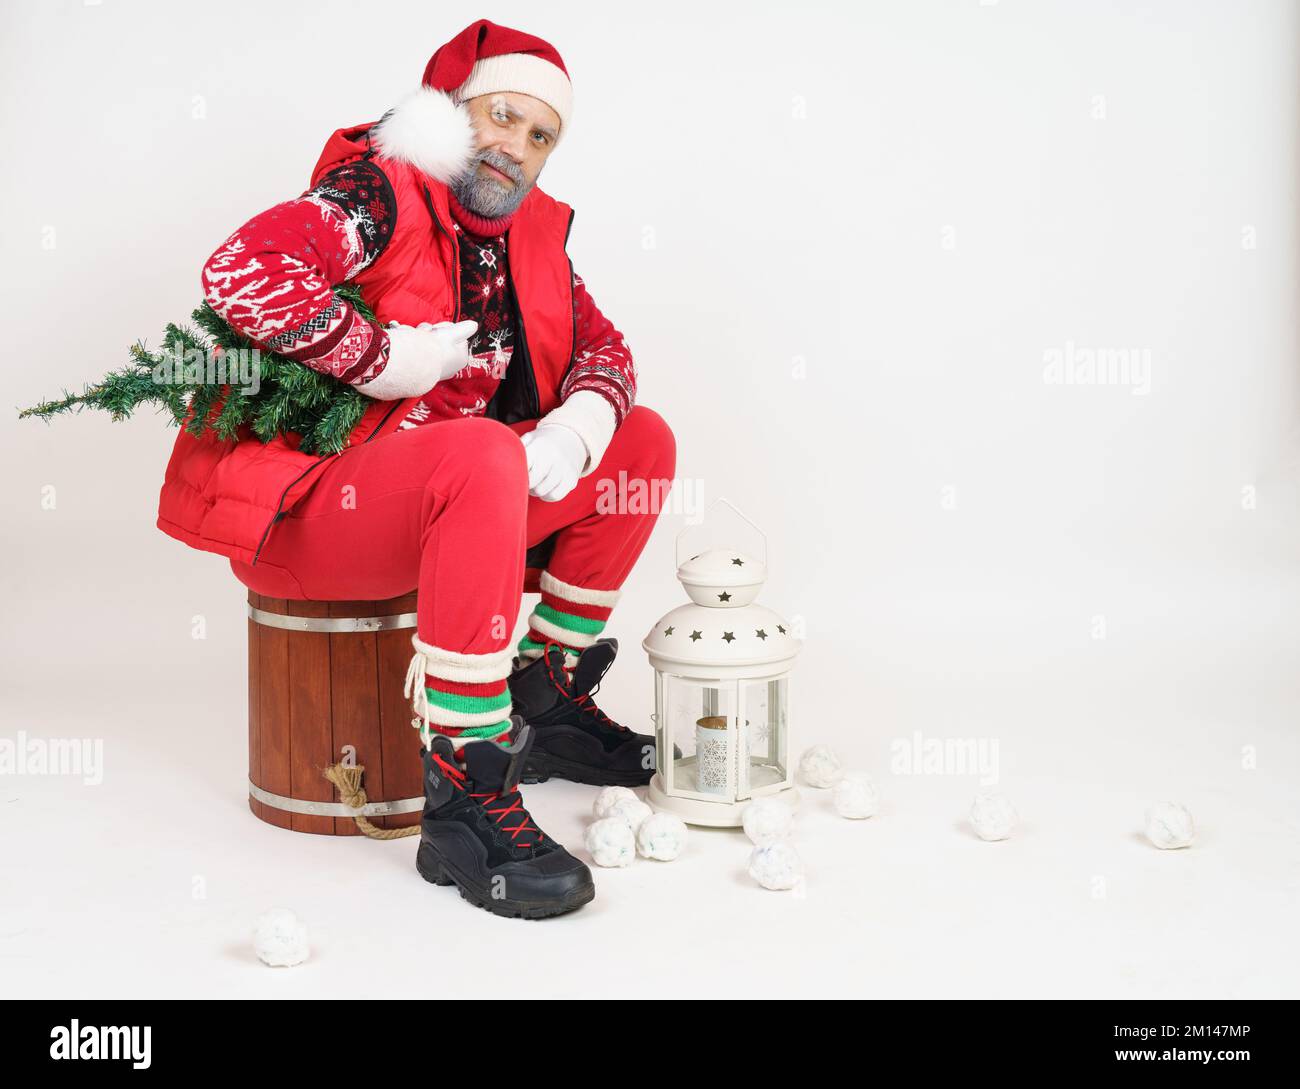 Holiday and Christmas concept. Santa Claus sits on a wooden bucket, holding a Christmas tree, next to a lantern. Stock Photo